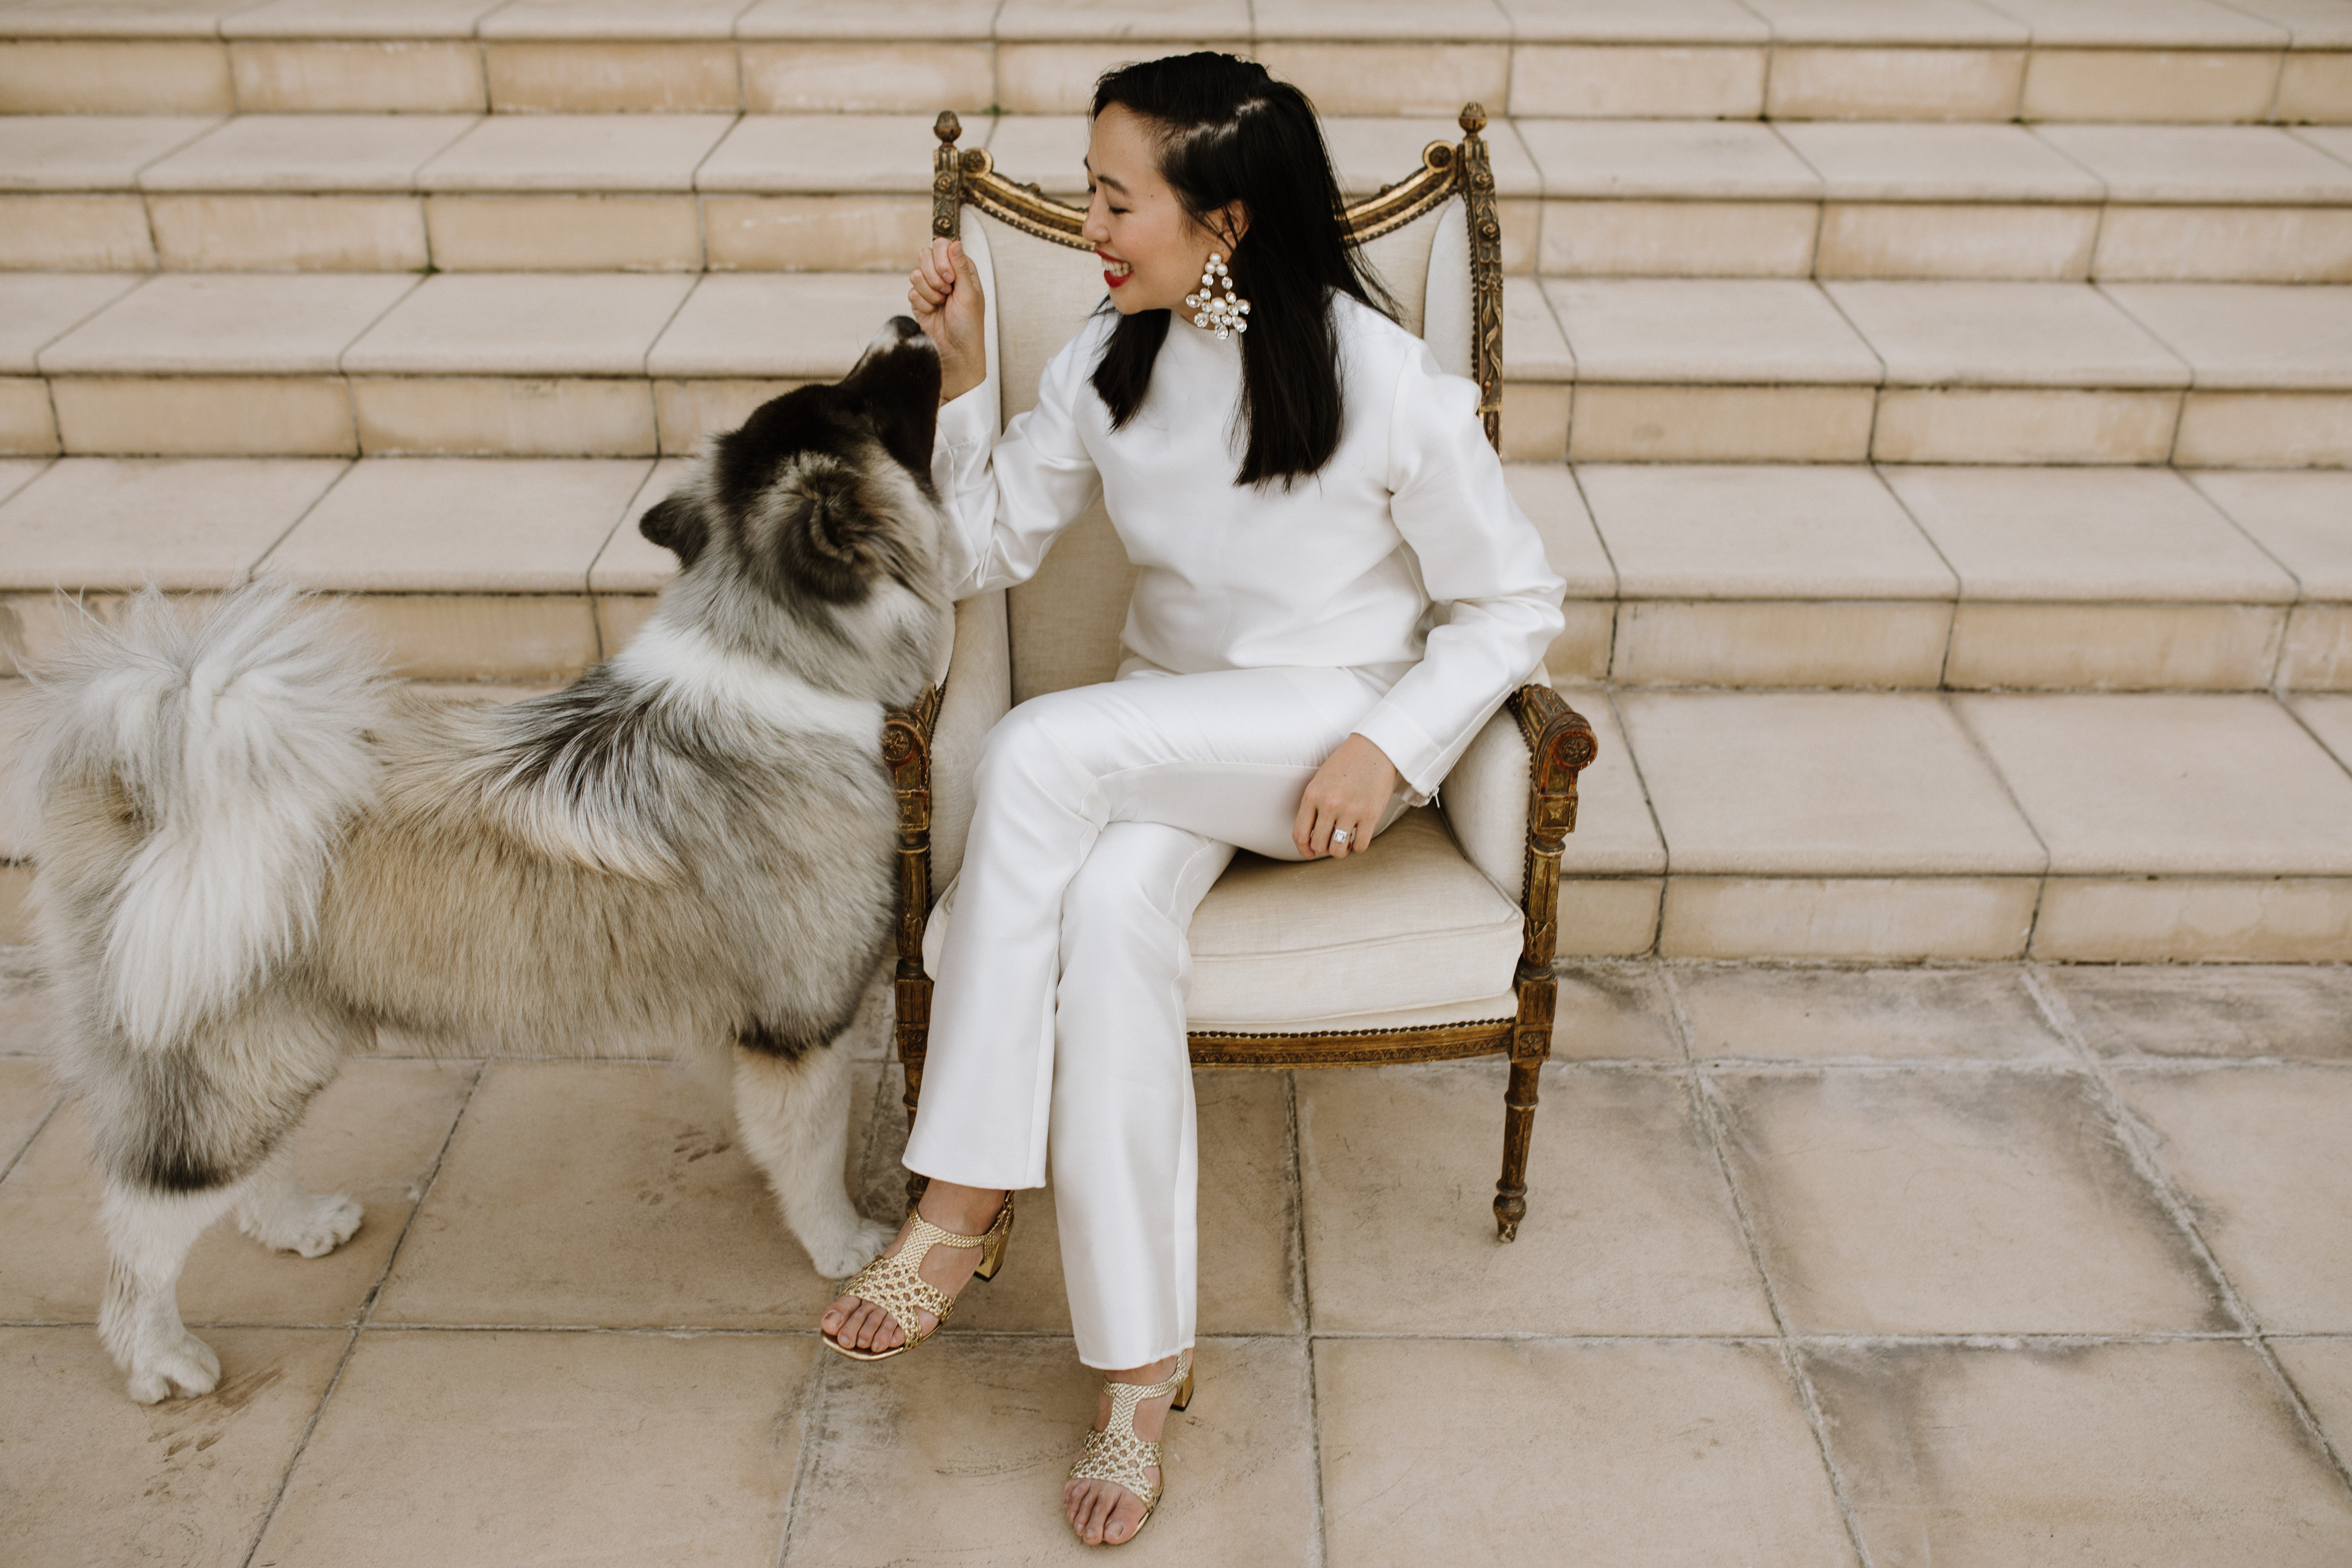 Zara Wong is the fashion features and content strategy director of Vogue Australia. The editor, who has worked in New York and Hong Kong, opens up her home and shares her wardrobe favourites